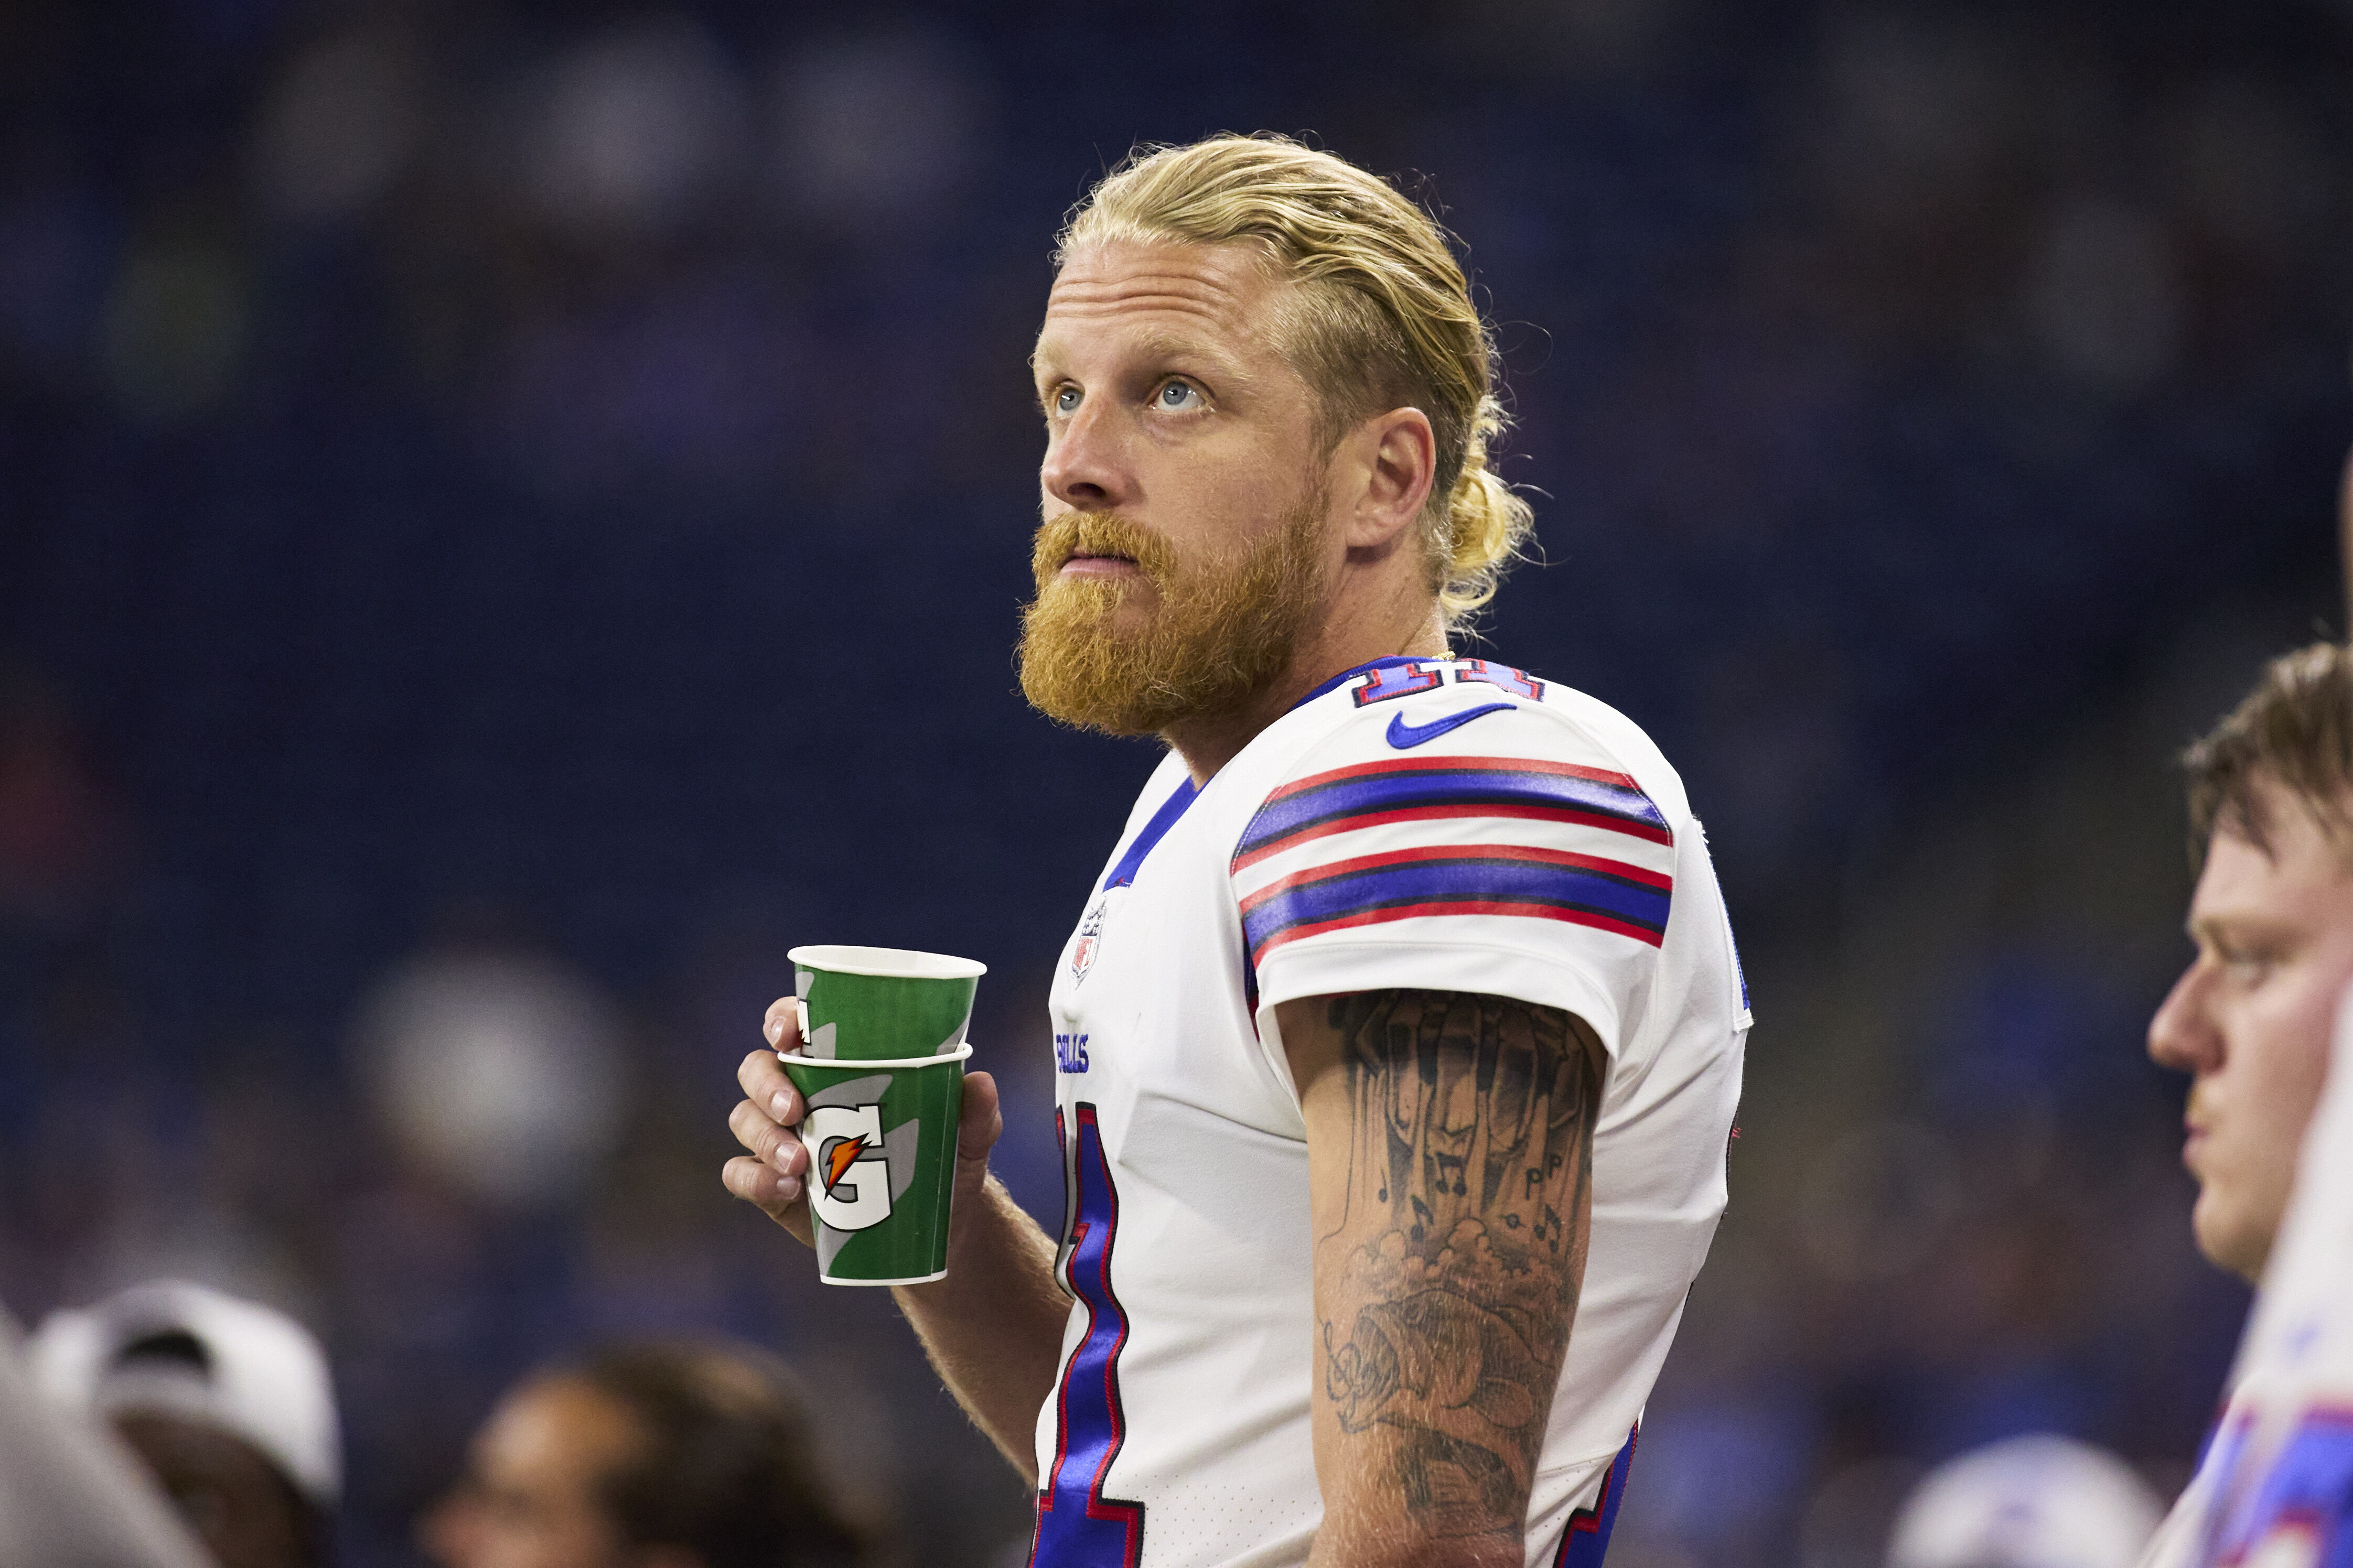 If Cole Beasley retires, how will it affect the Buffalo Bills in 2021?